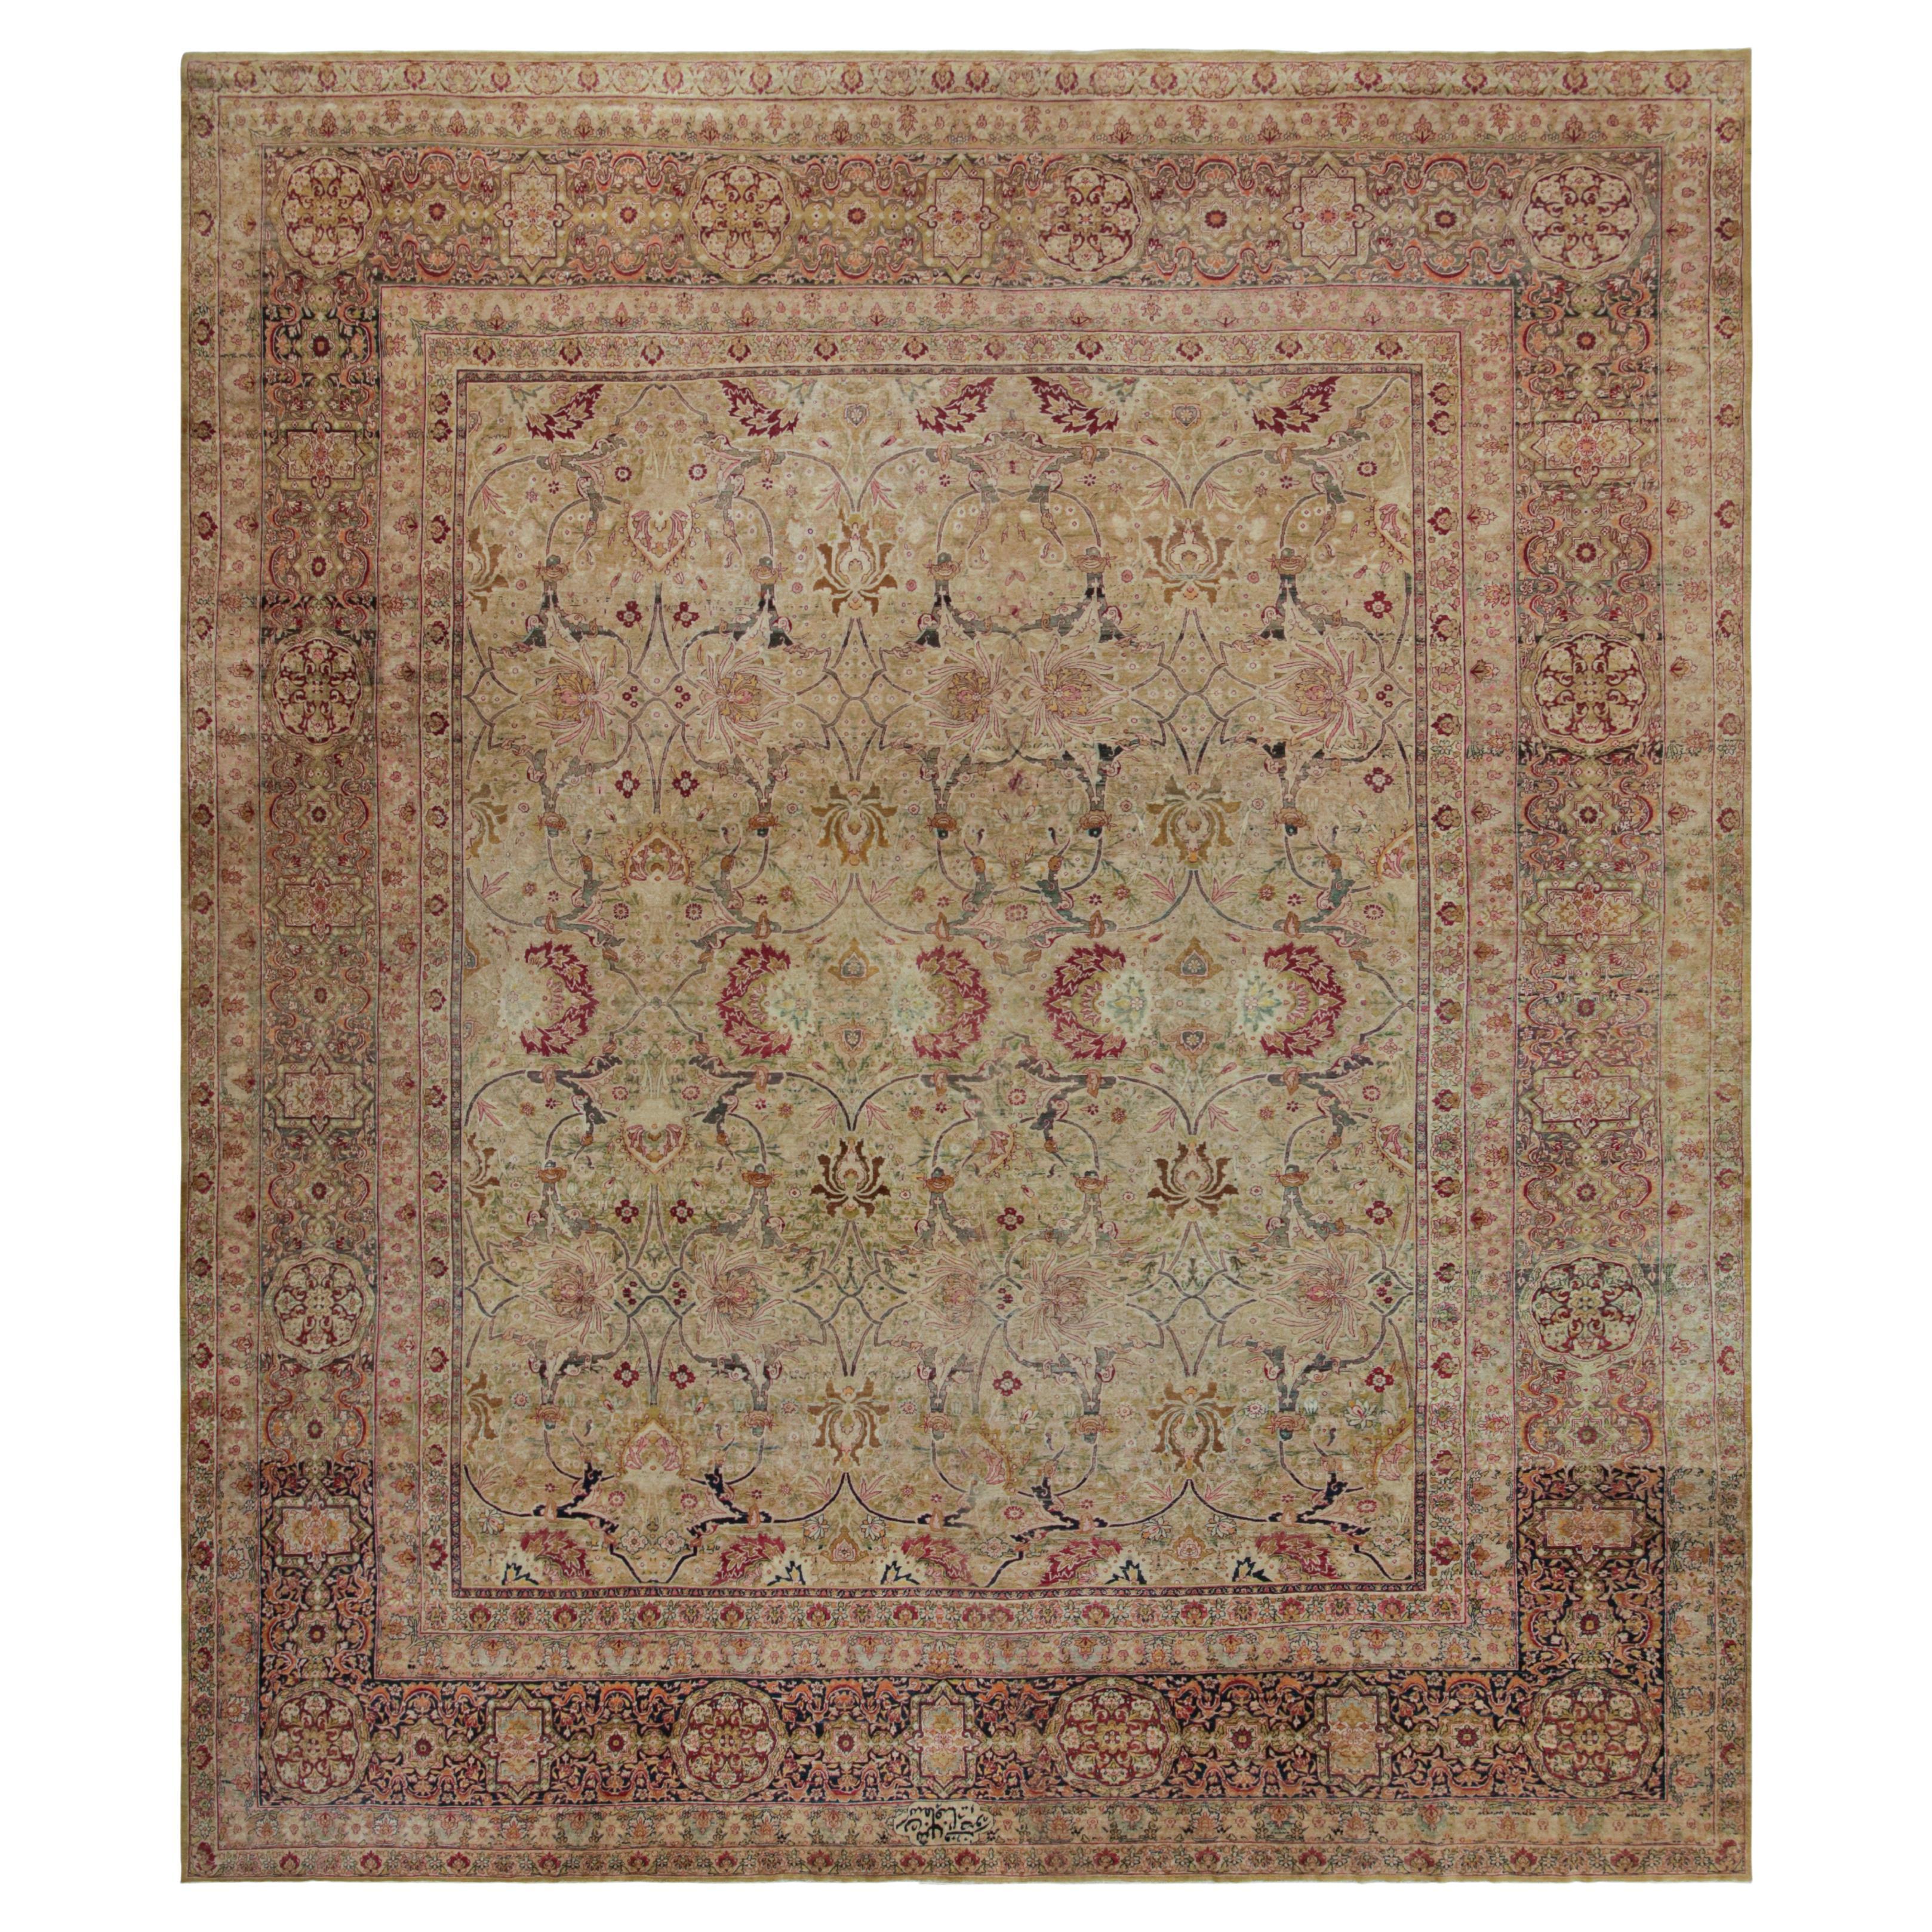 Antique Persian Kerman Lavar Rug with Floral Patterns, from Rug & Kilim For Sale